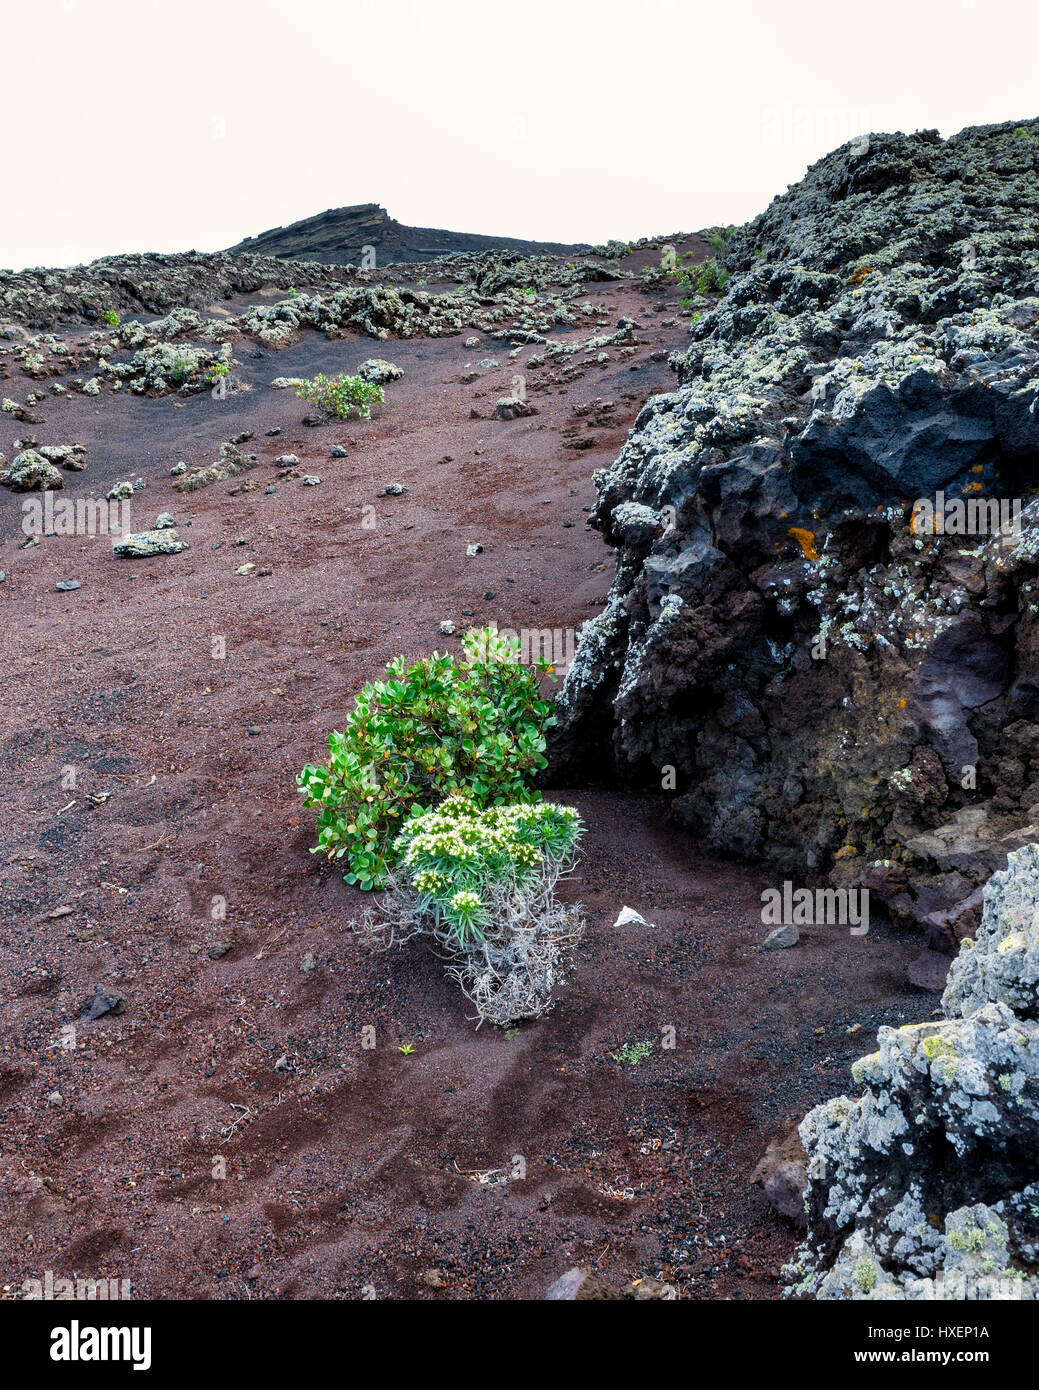 Volcan de San Antonio located in the Cumbre Vieja region in Fuencaliente, La Palma.  A rugged landscape shows the formation of the lava.  Vocano San Antonio is visible on the horizon in the distance.  Only a little vegetation grows amonst the scattered clumps of lava rock. Stock Photo